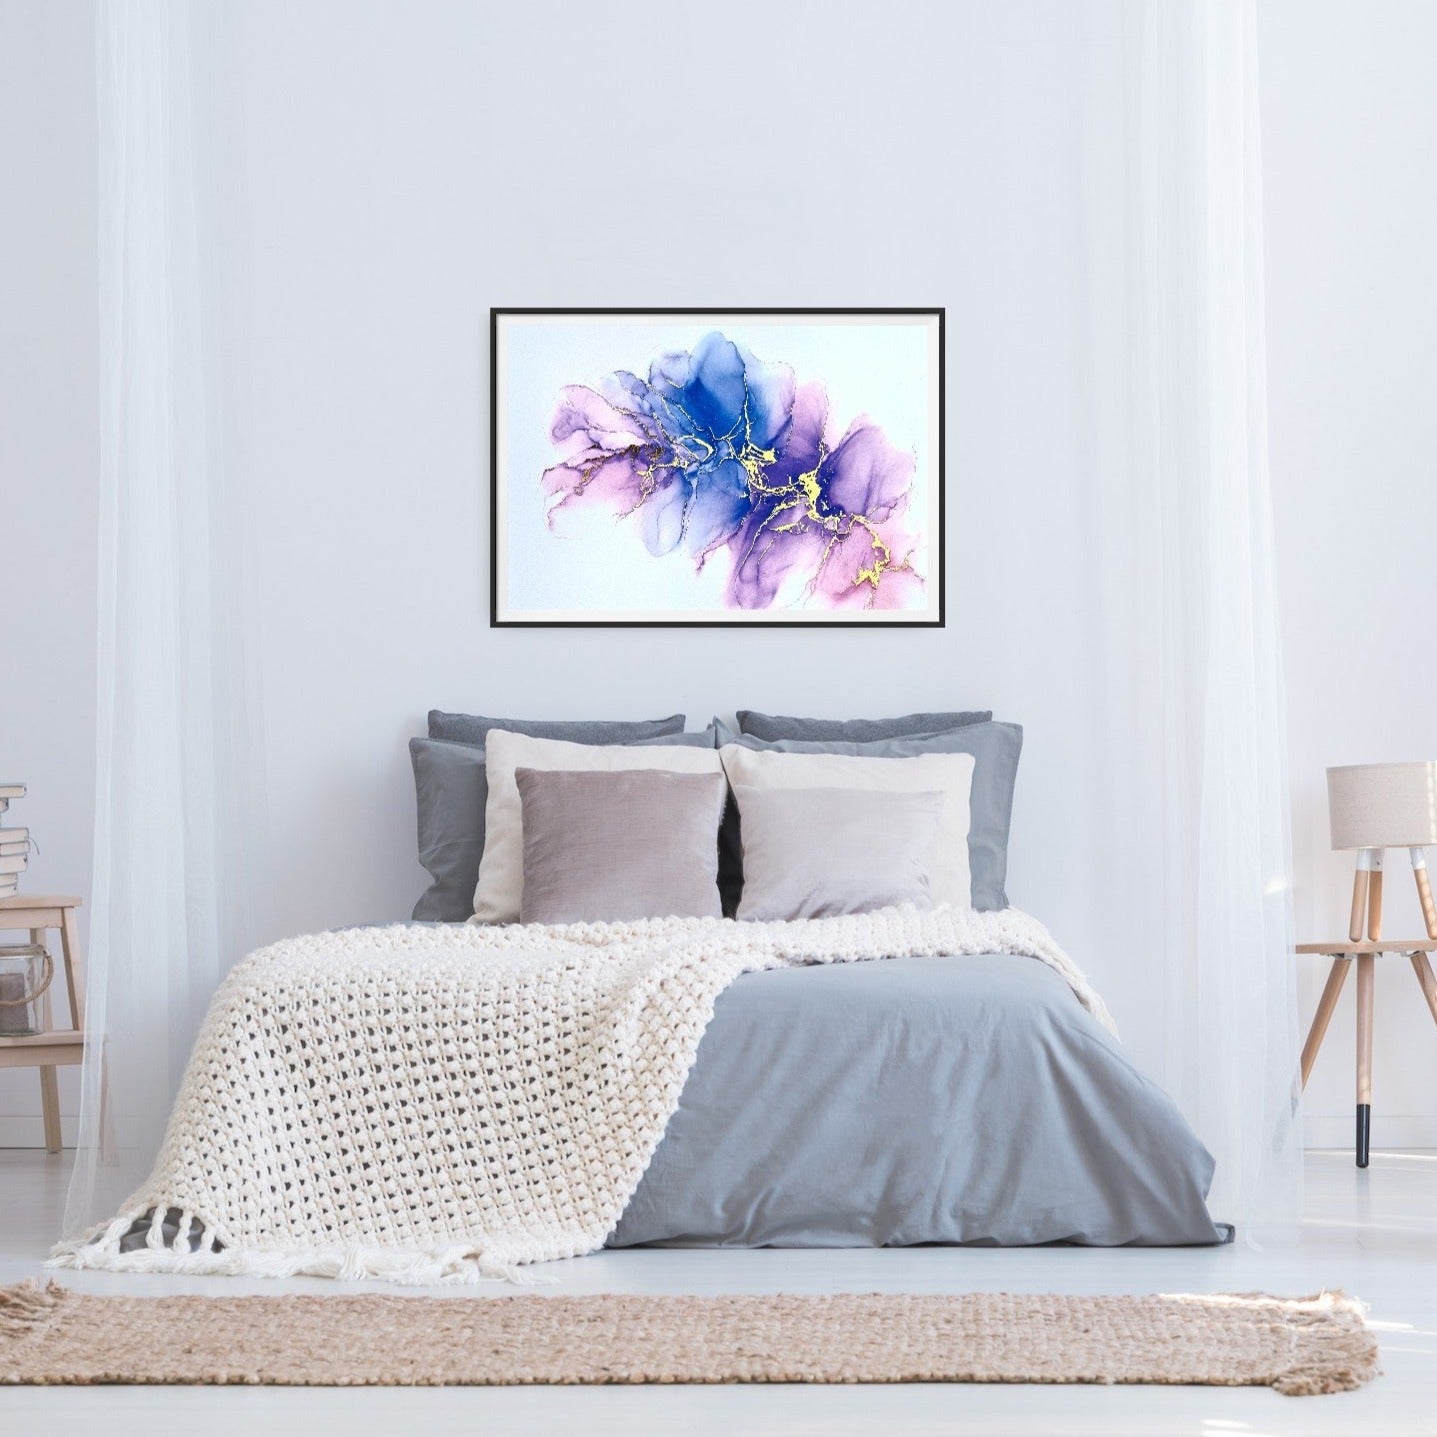 luxury art print framed above a bed in a calming bedroom